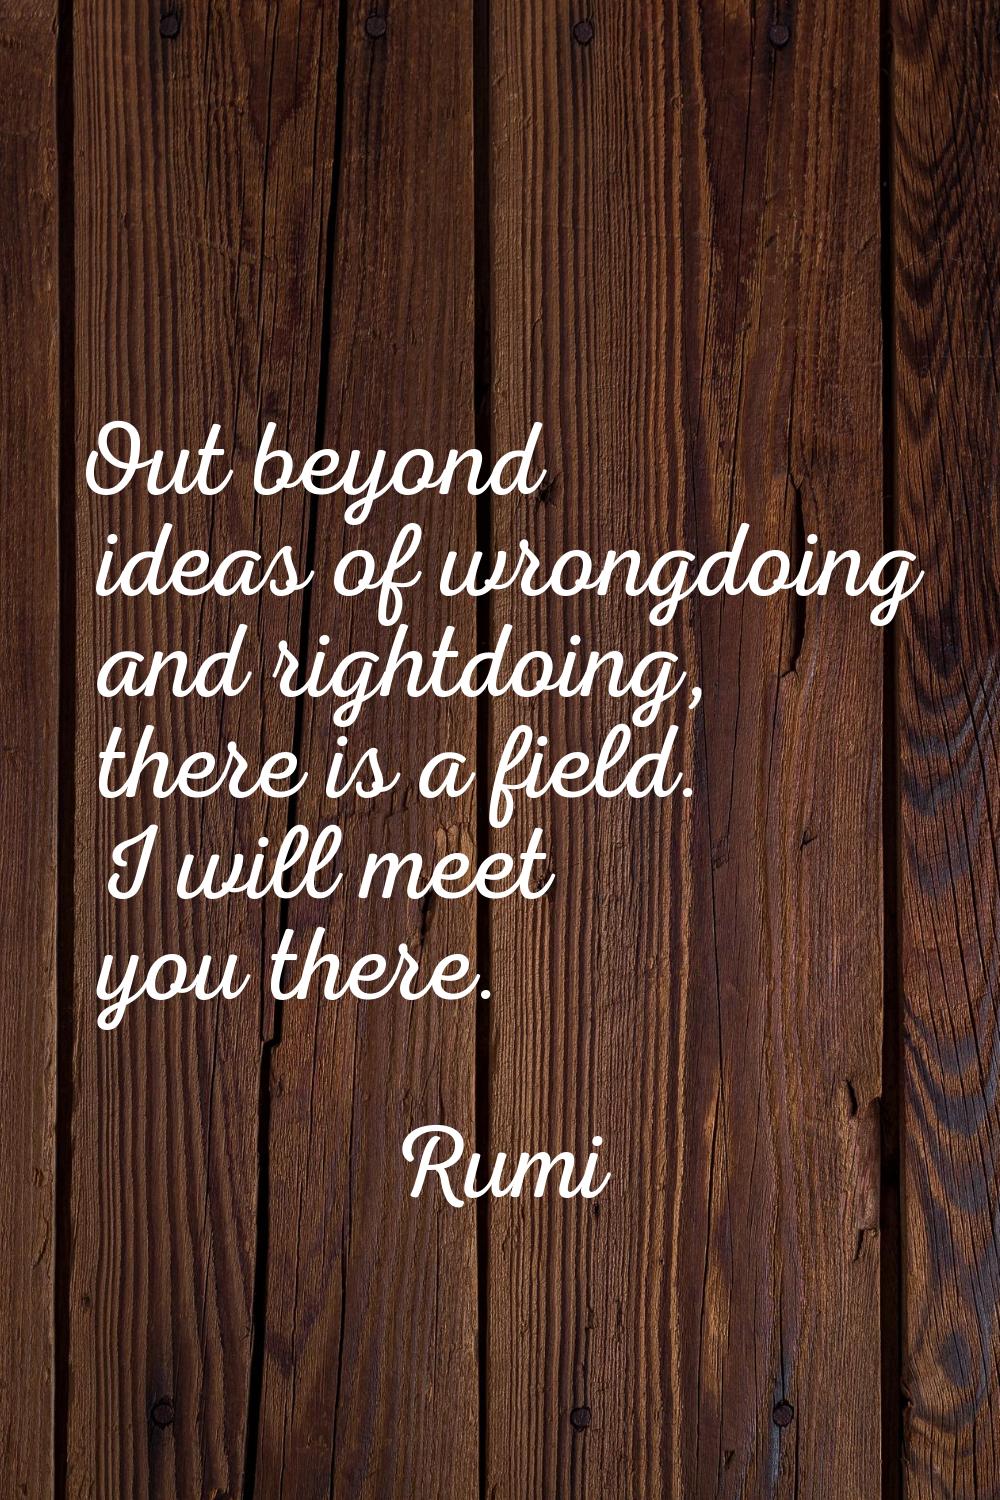 Out beyond ideas of wrongdoing and rightdoing, there is a field. I will meet you there.